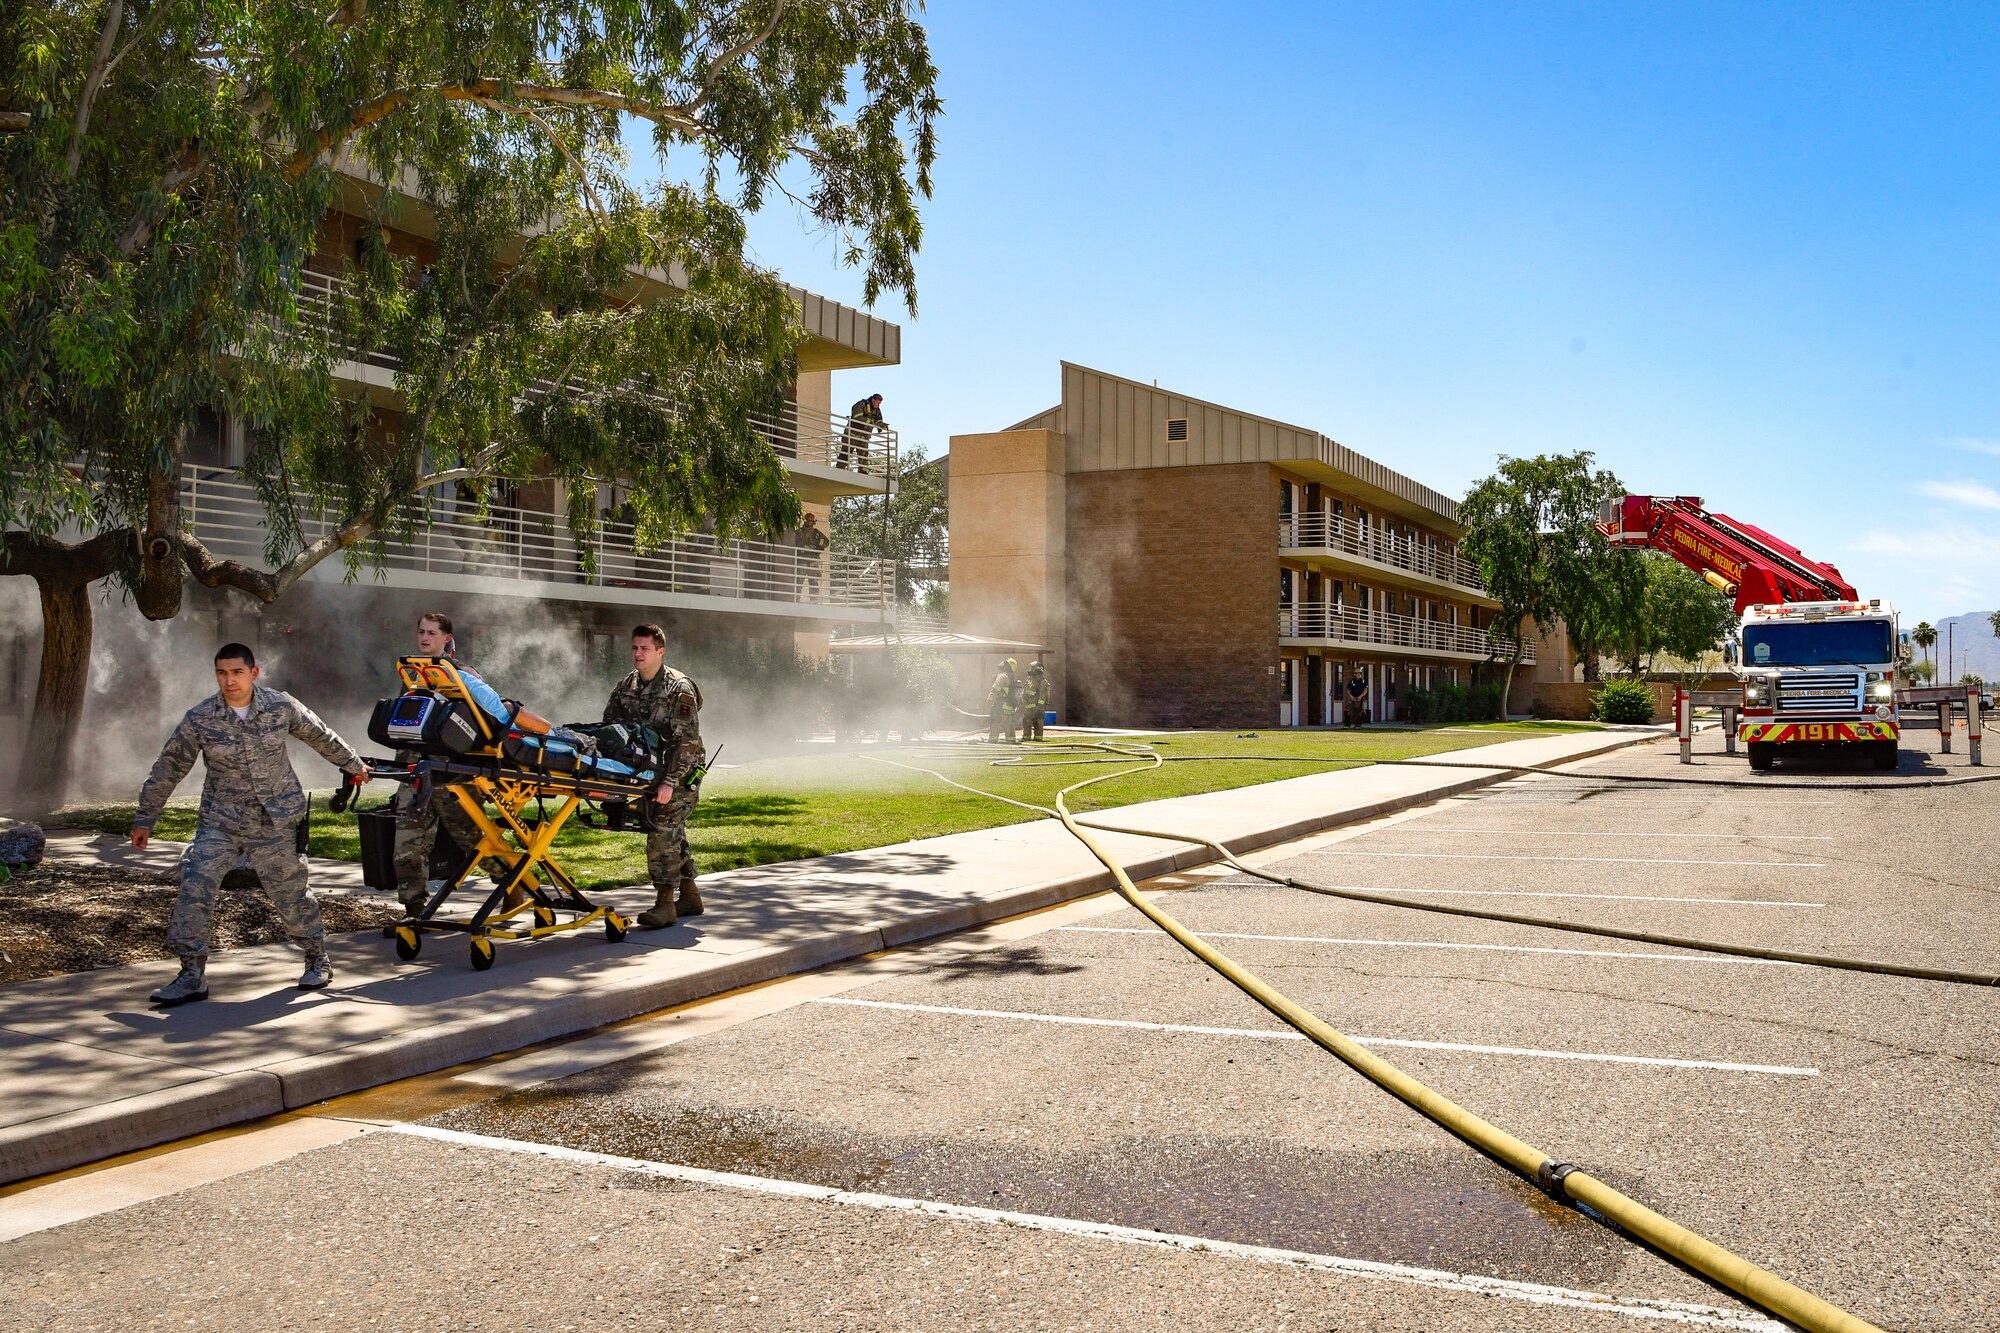 Paramedics transport a mannequin with simulated injures to an ambulance during a joint training exercise May 3, 2019, at Luke Air Force Base, Ariz. The exercise tested the ability of different fire departments to work together successfully when responding to emergency calls that might include multi-level structural fires or injuries. (U.S. Air Force photo by Airman 1st Class Zoie Cox)